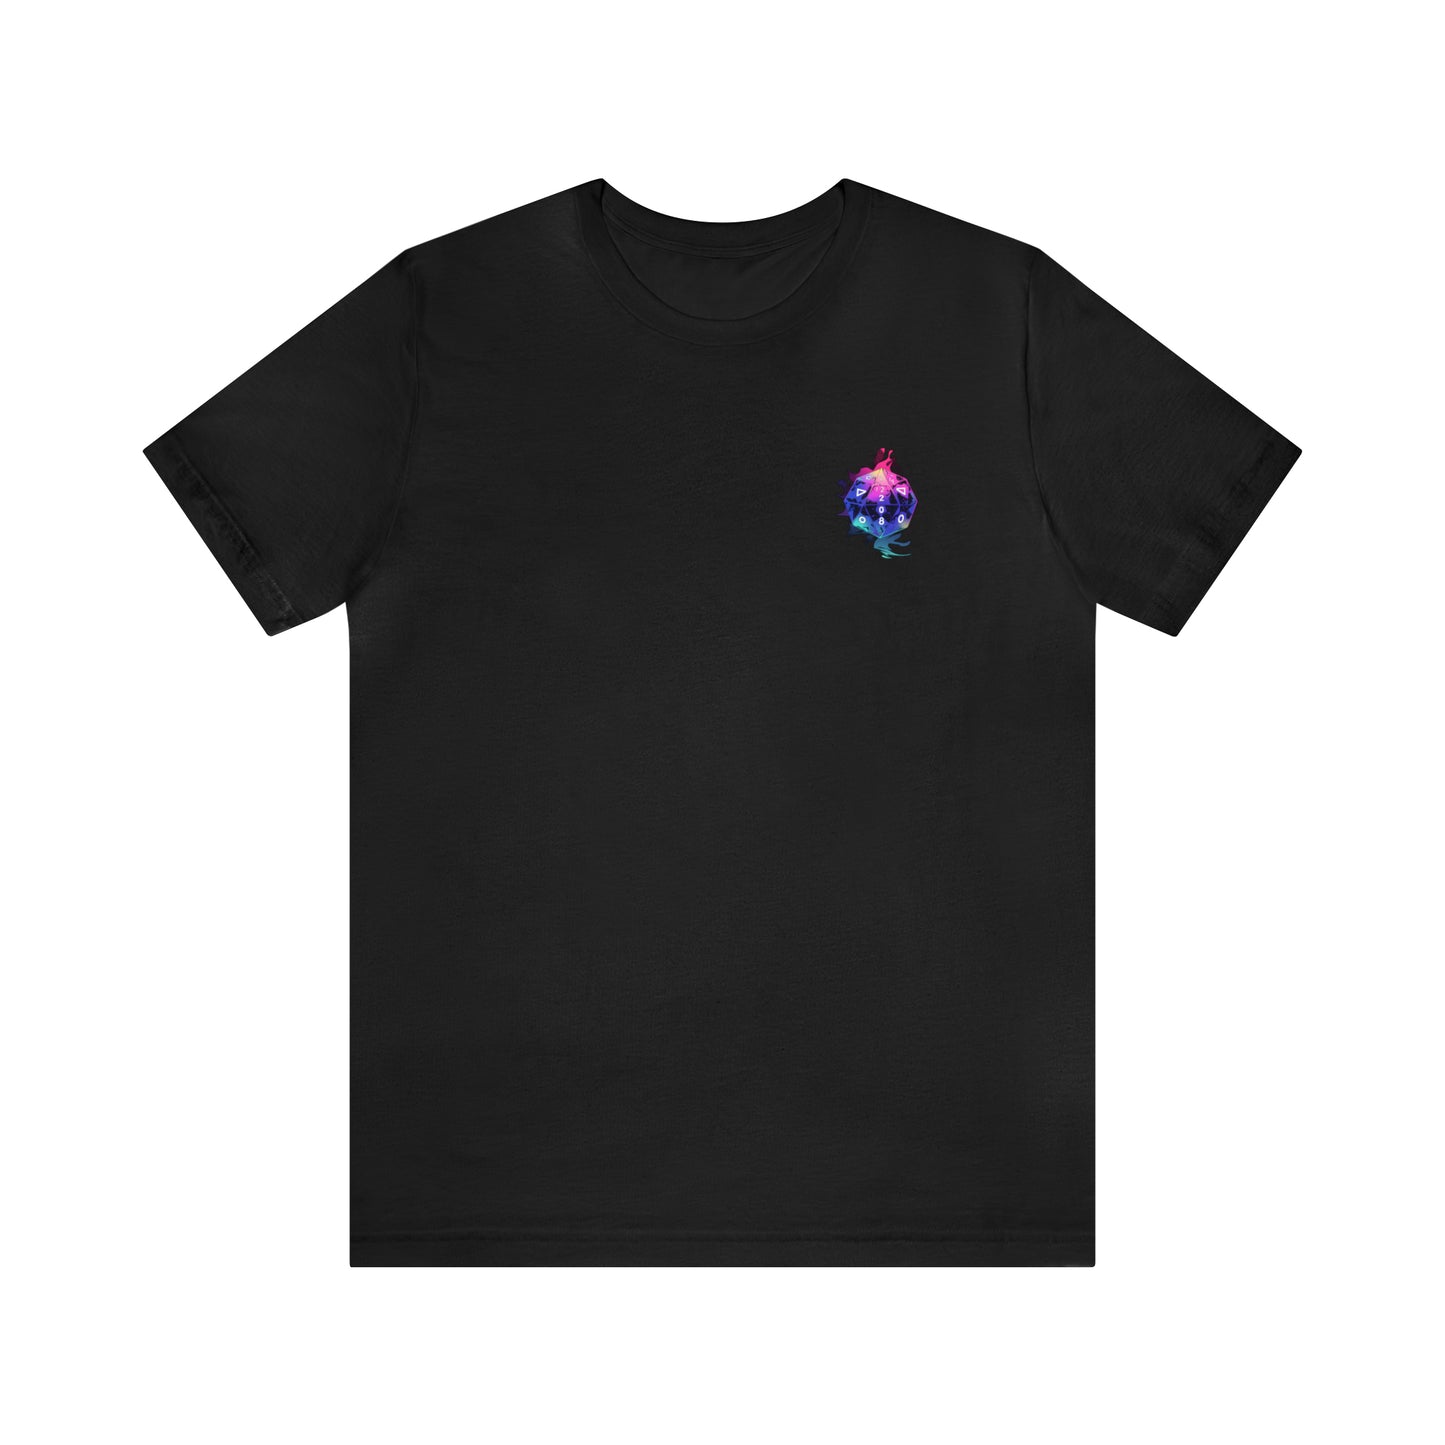 black-quest-thread-tee-shirt-with-small-neon-flame-d20-dice-on-left-chest